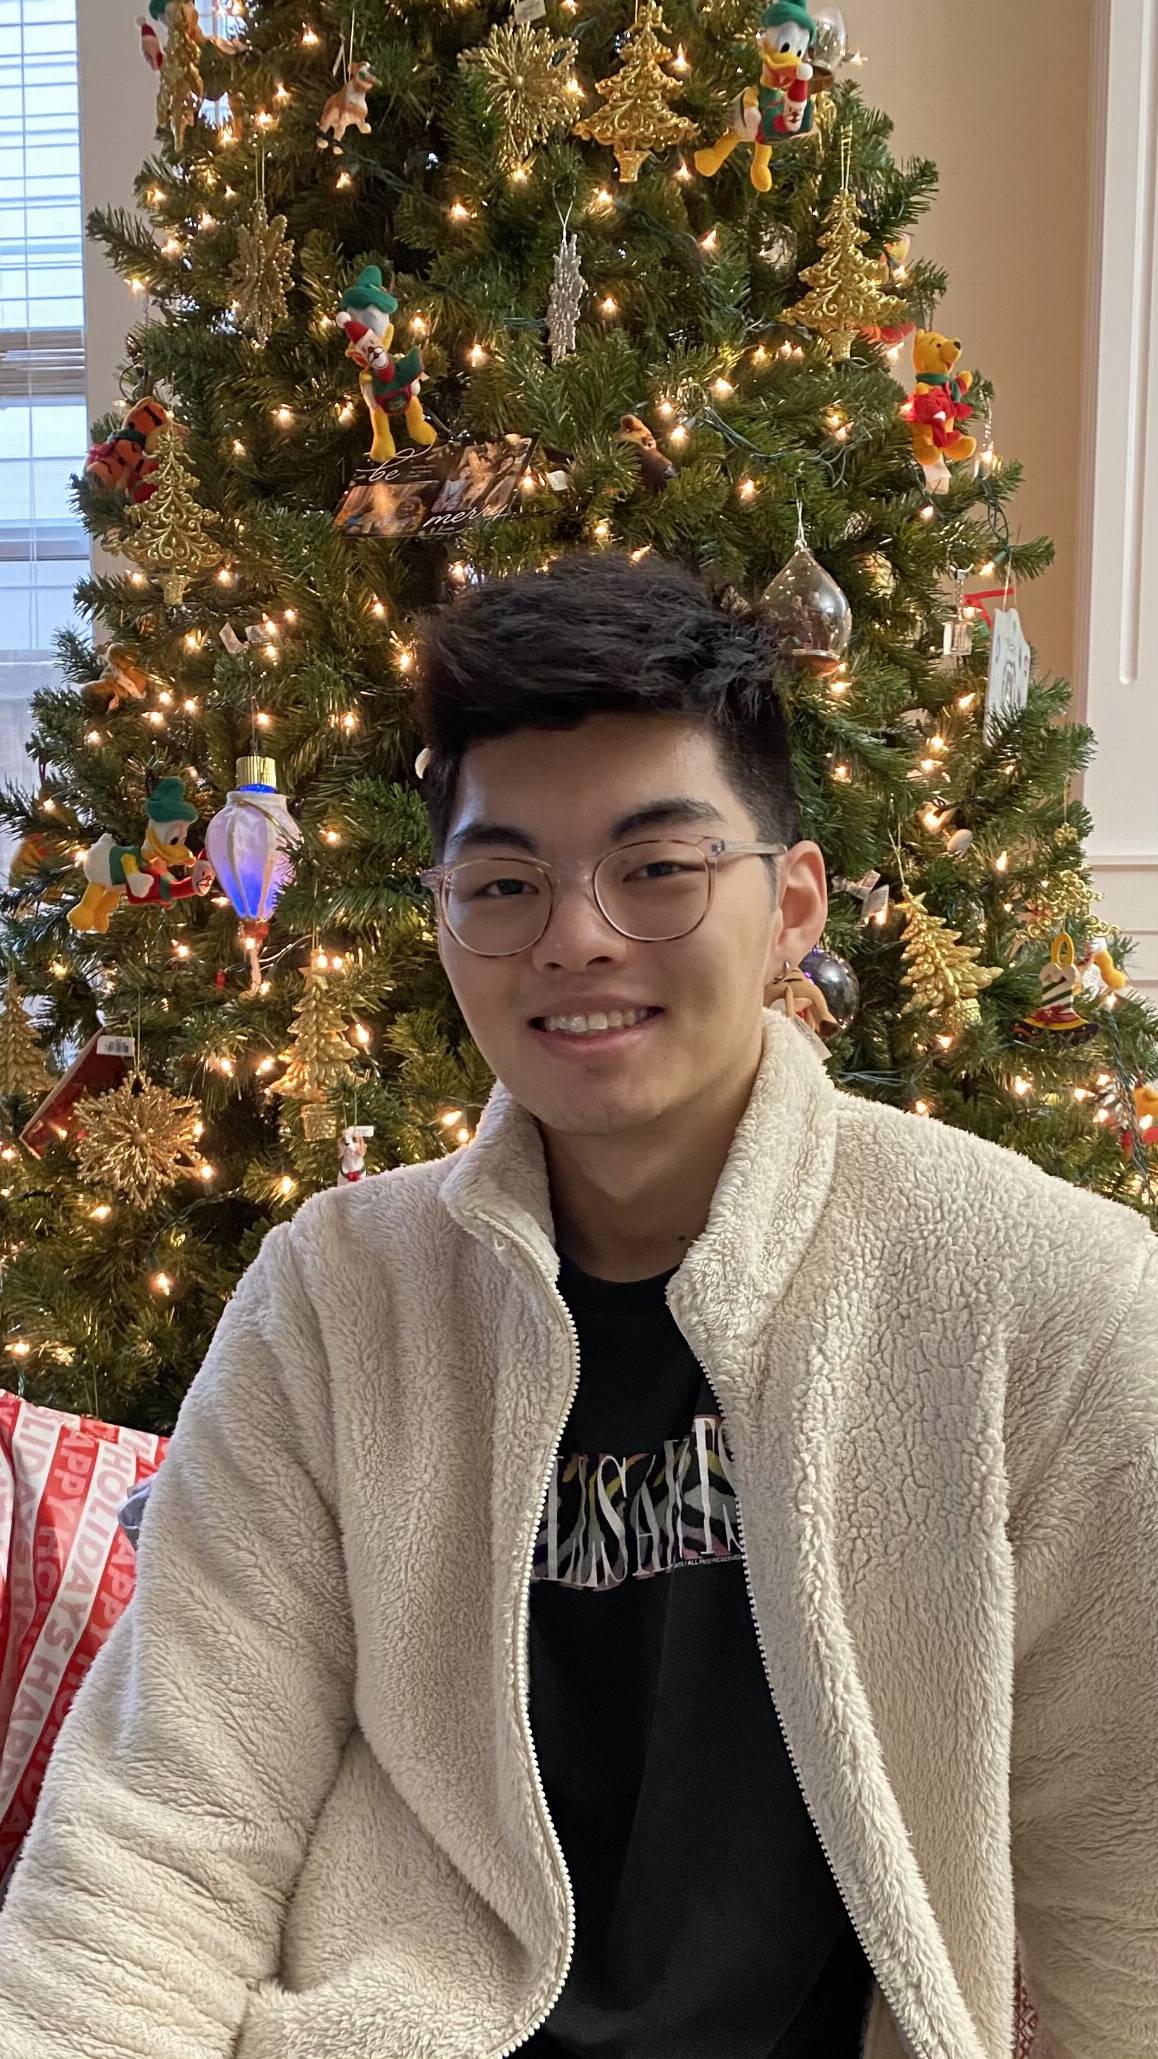 Eric Chung in front of a Christmas tree.